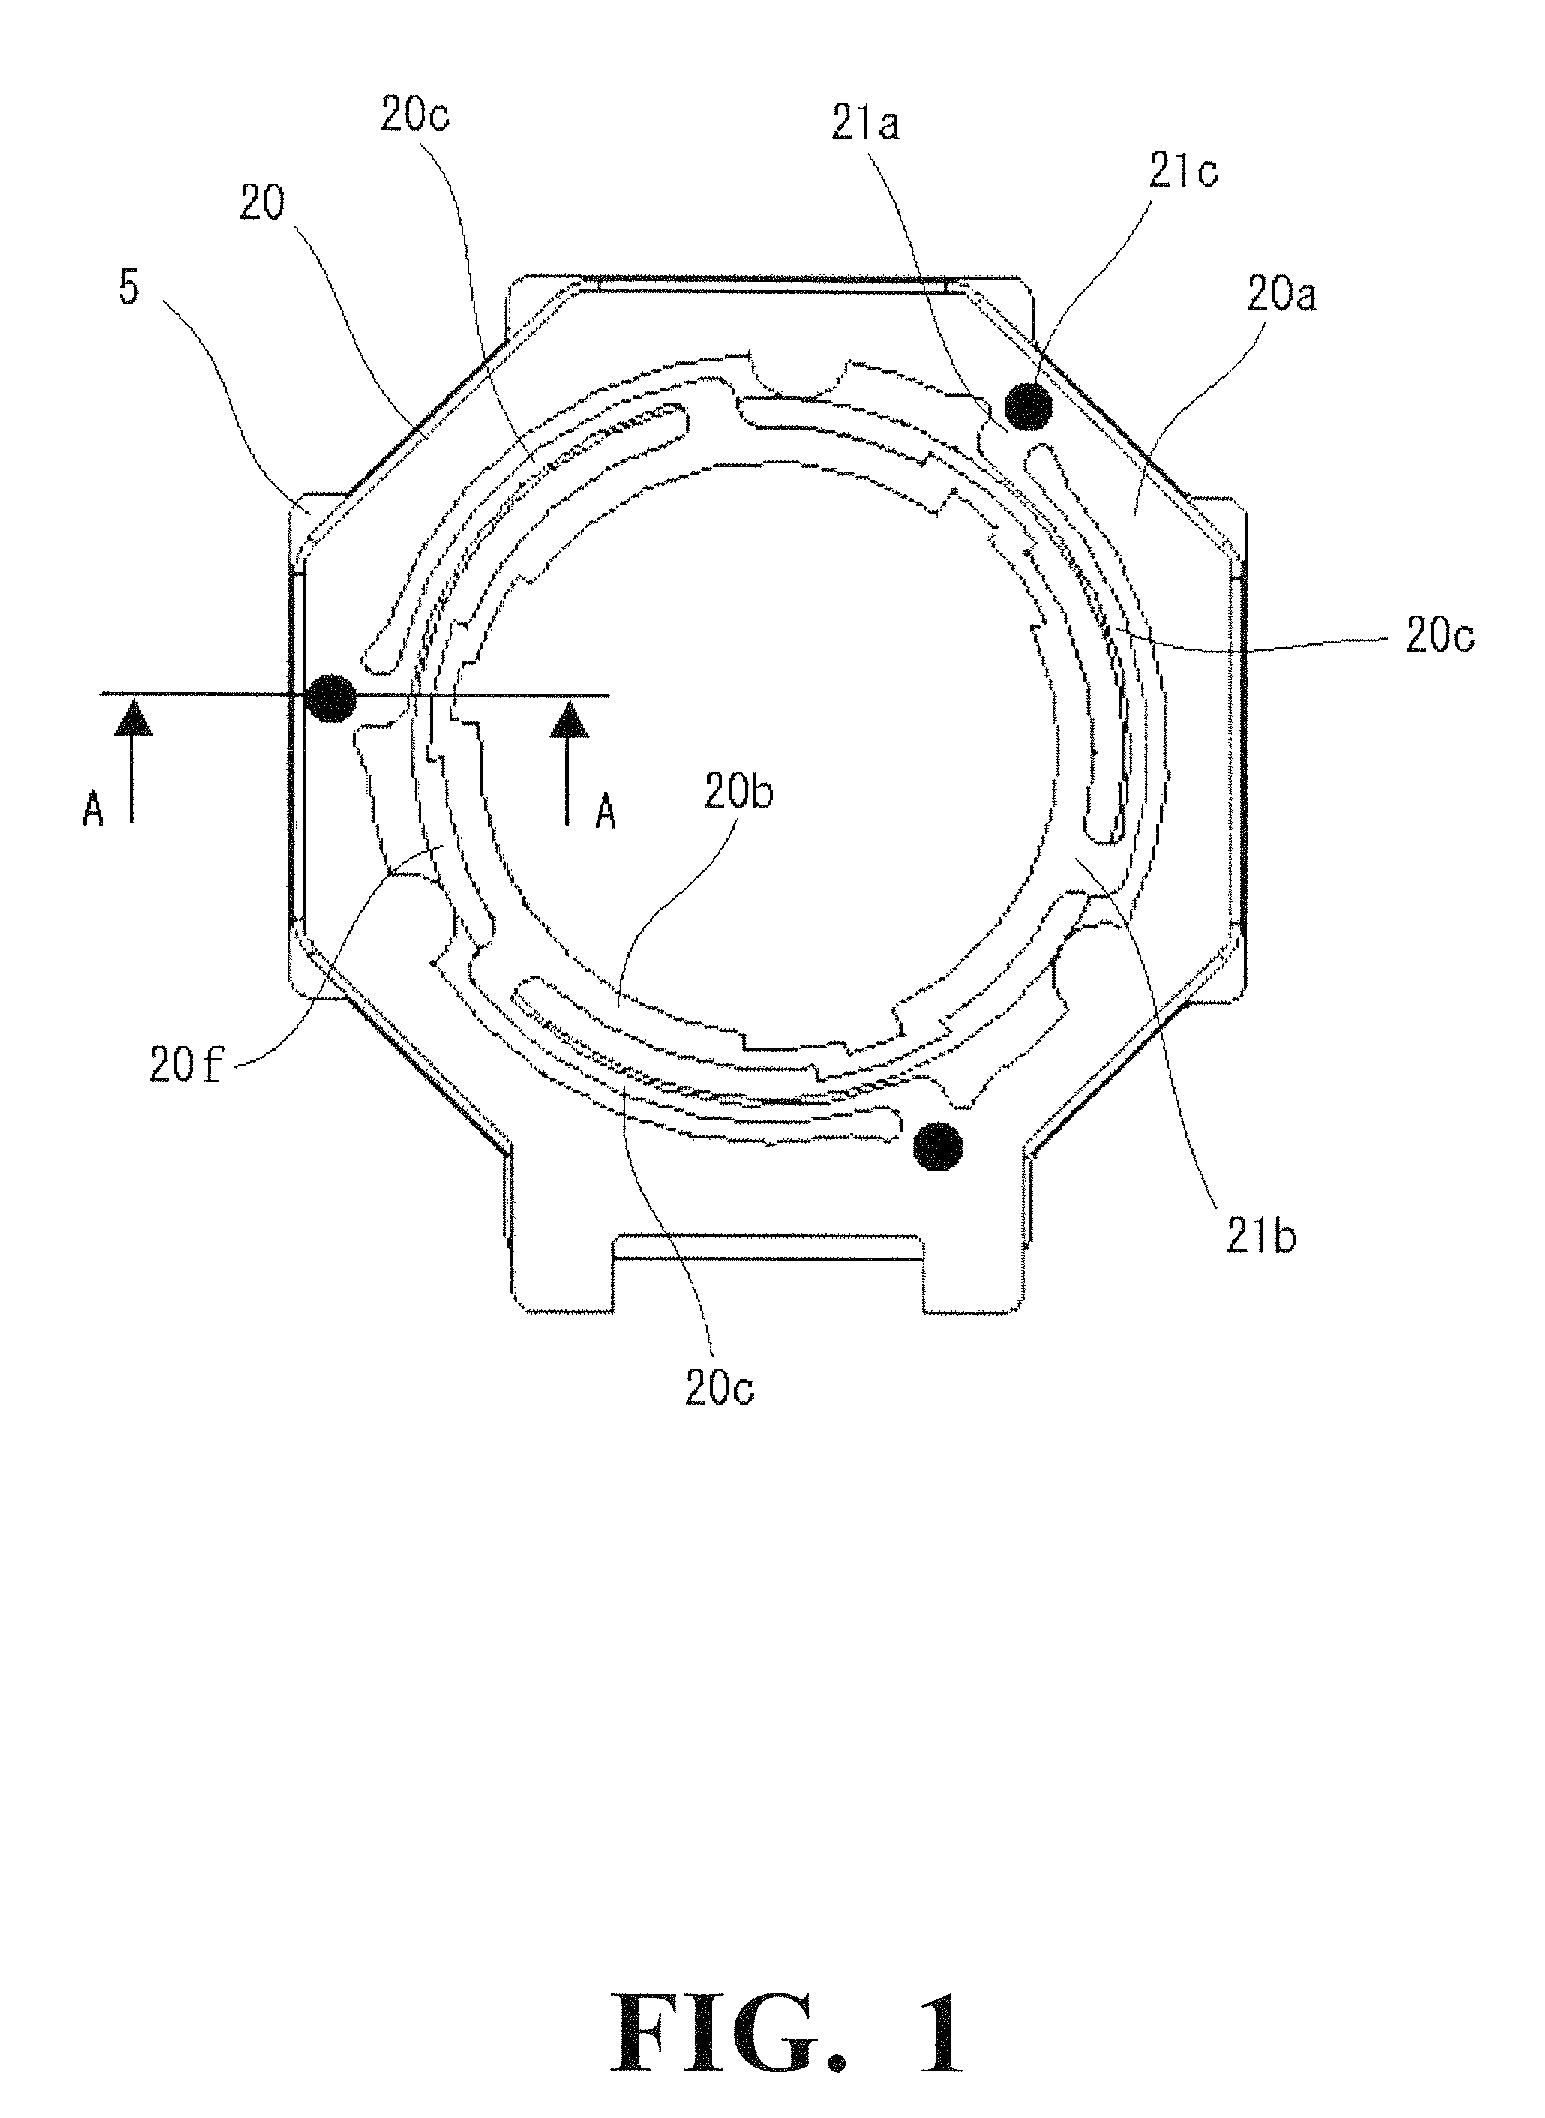 Camera module with improved leaf spring attachment